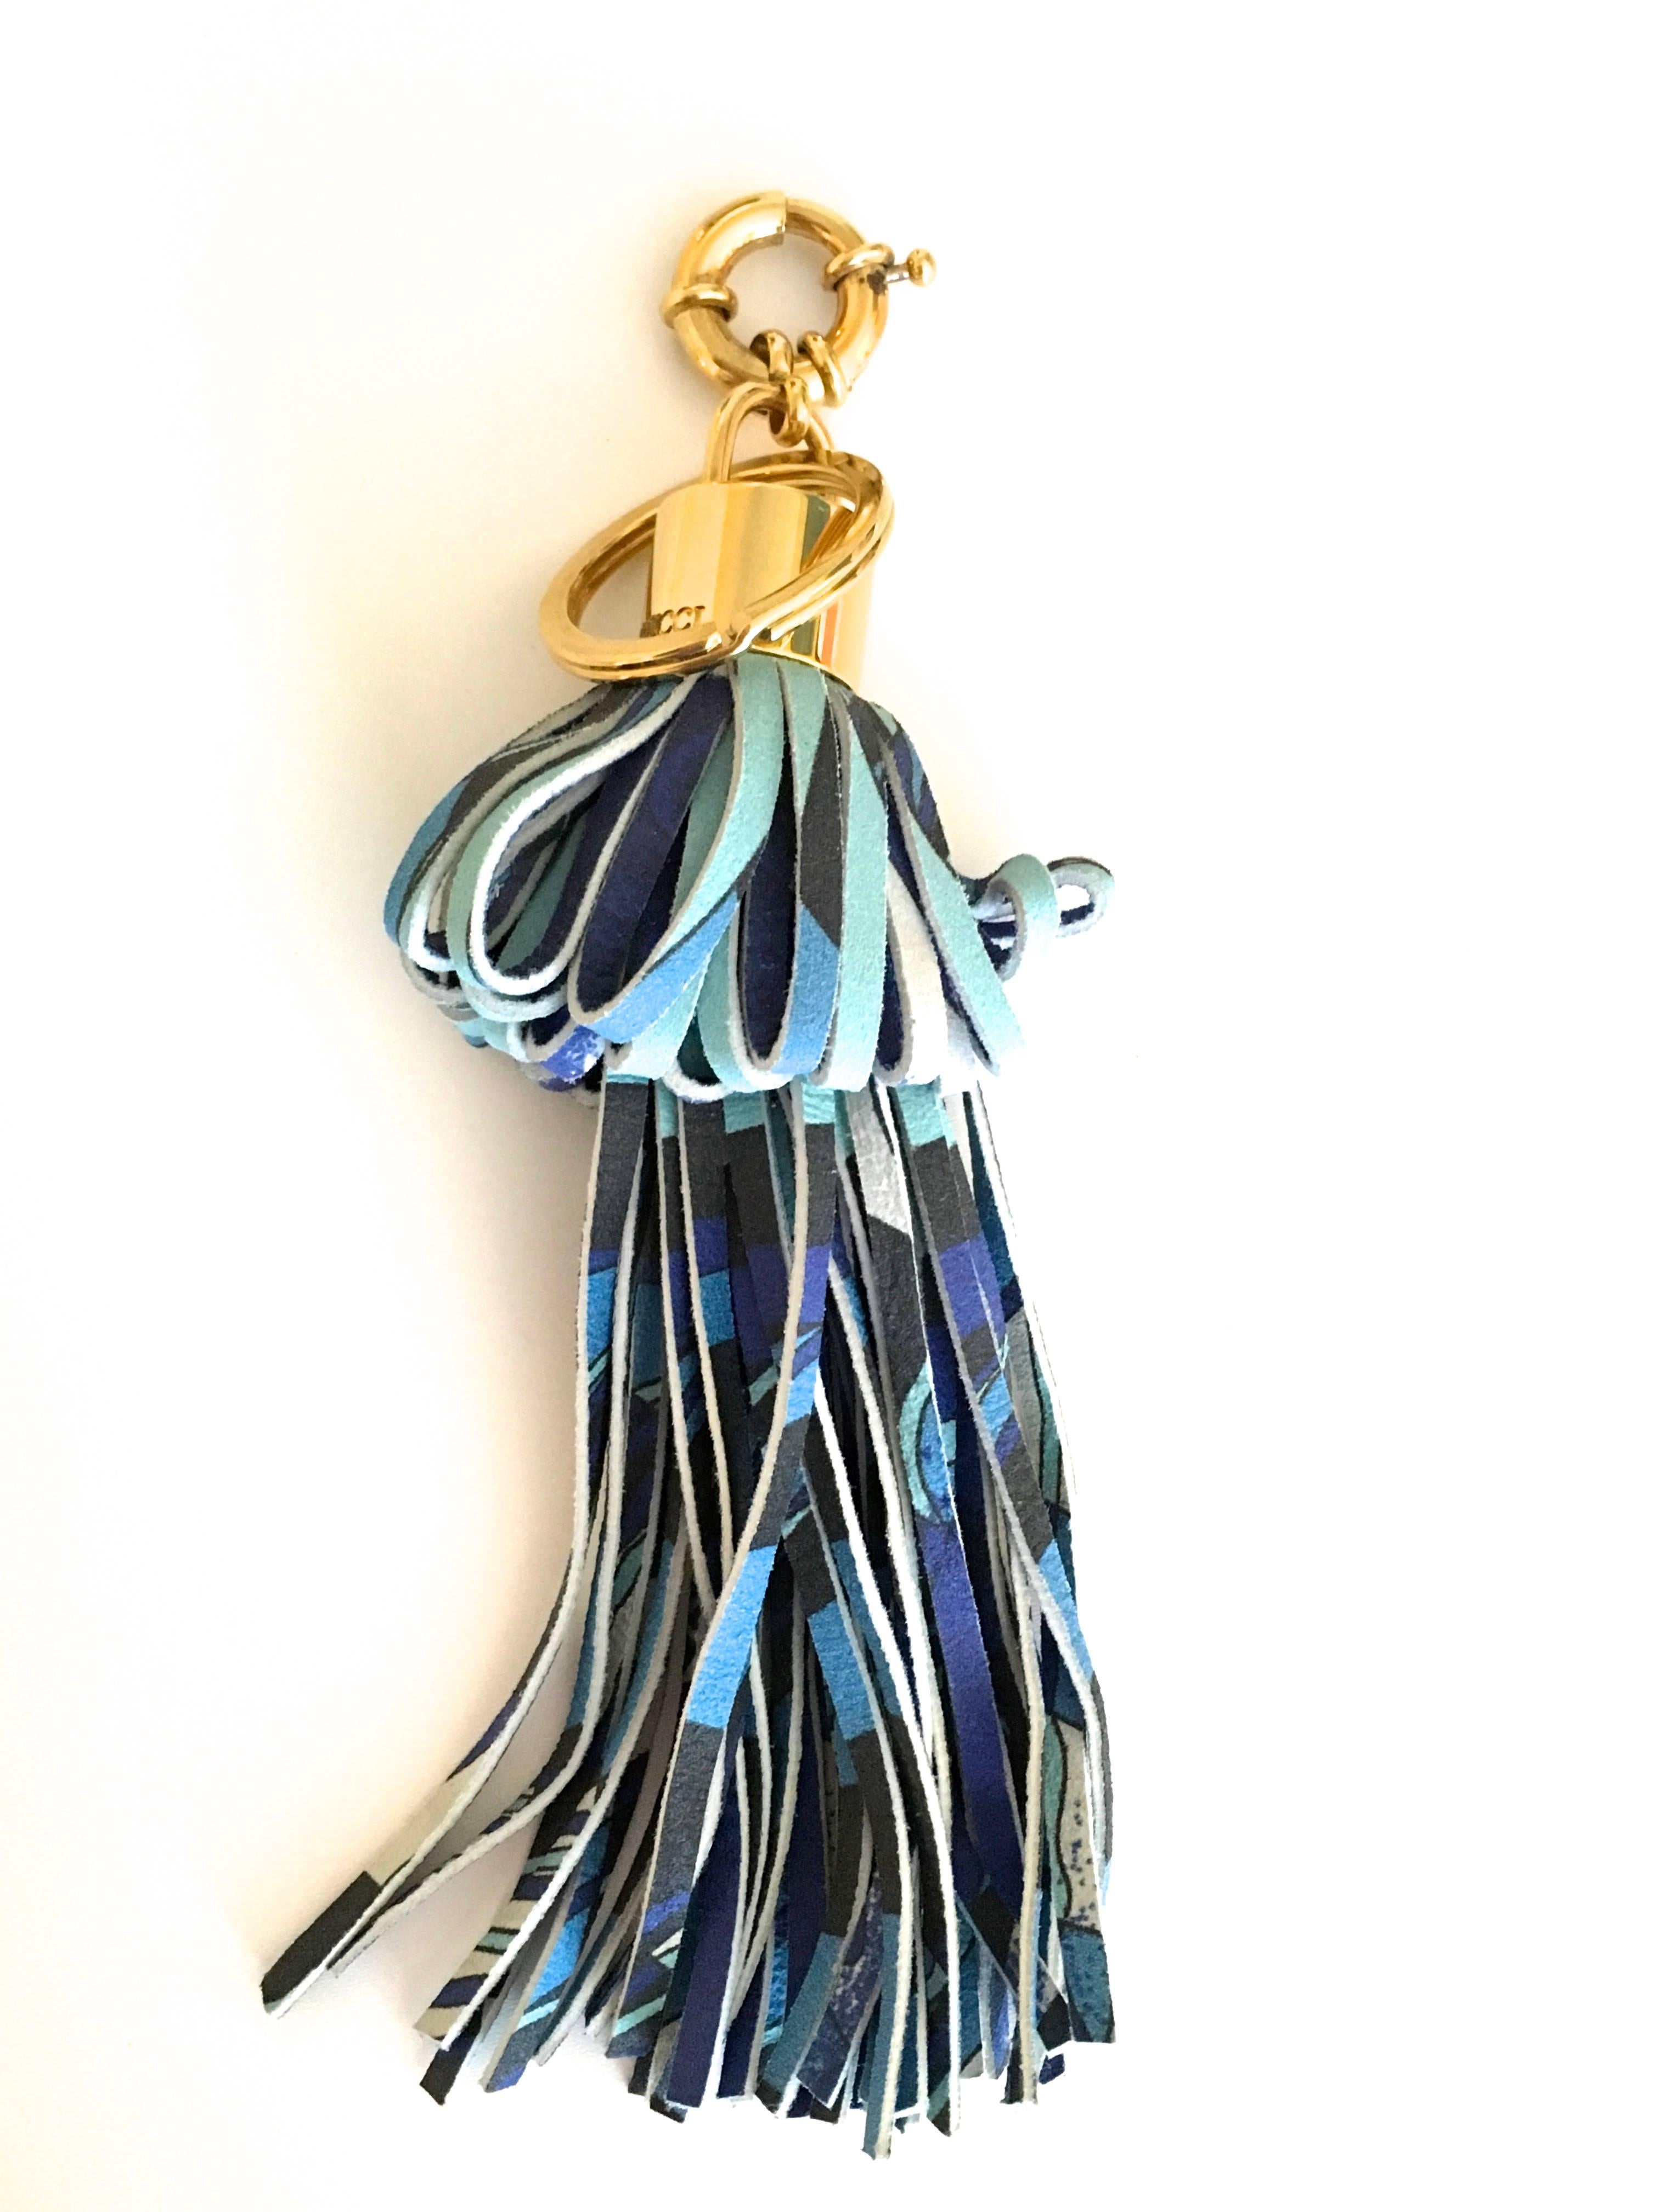 Presented here is a bag charm from the Emilio Pucci fashion house. This gorgeous charm is crafted from strips of leather from a design that is definitively Pucci. The strips of leather have been woven together into a accessory that can either be